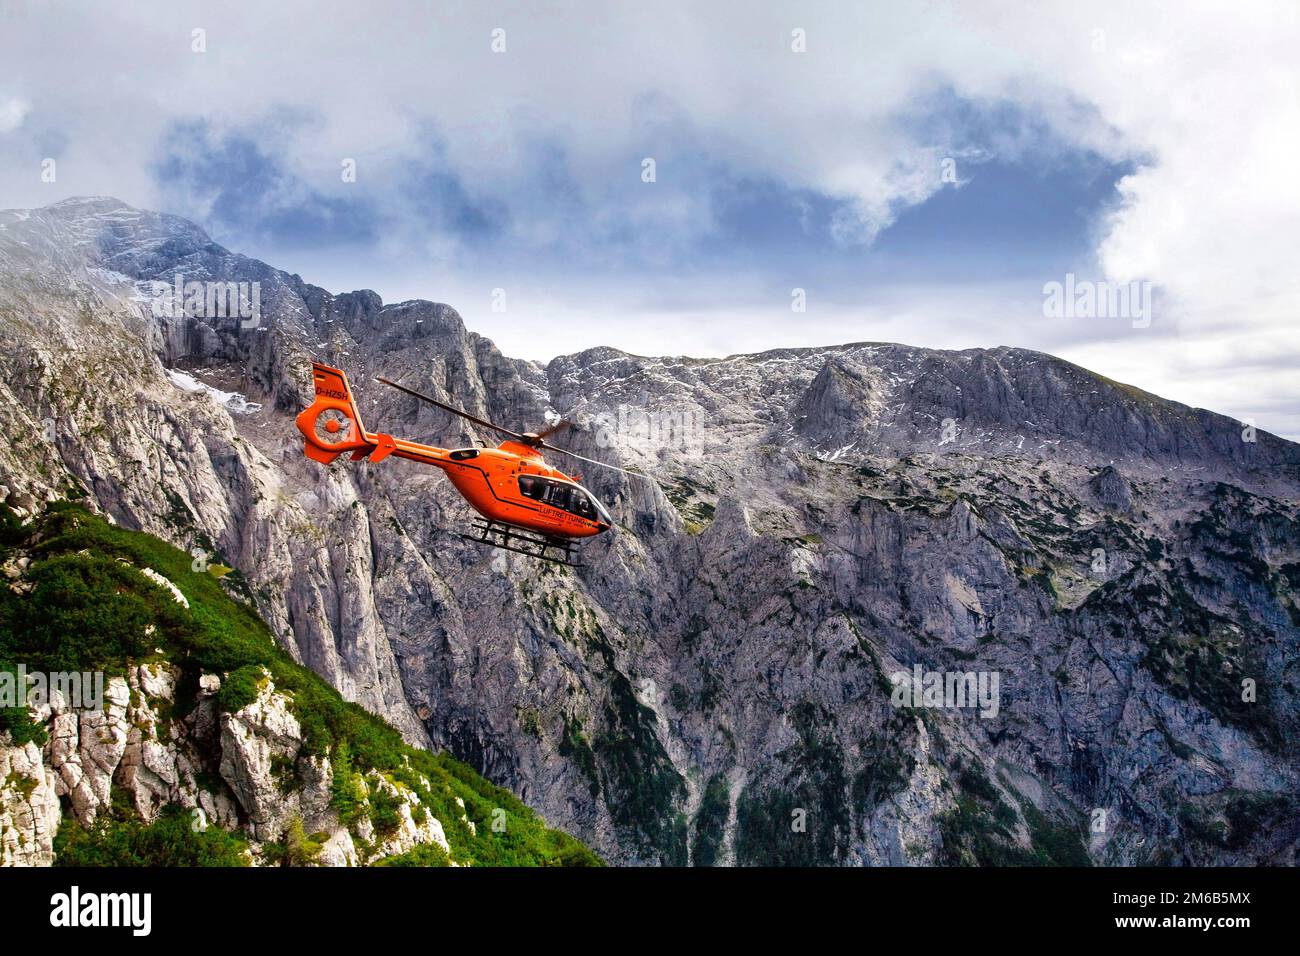 A medical helicopter removes a patient from high altitude in the Alps of Germany. Stock Photo